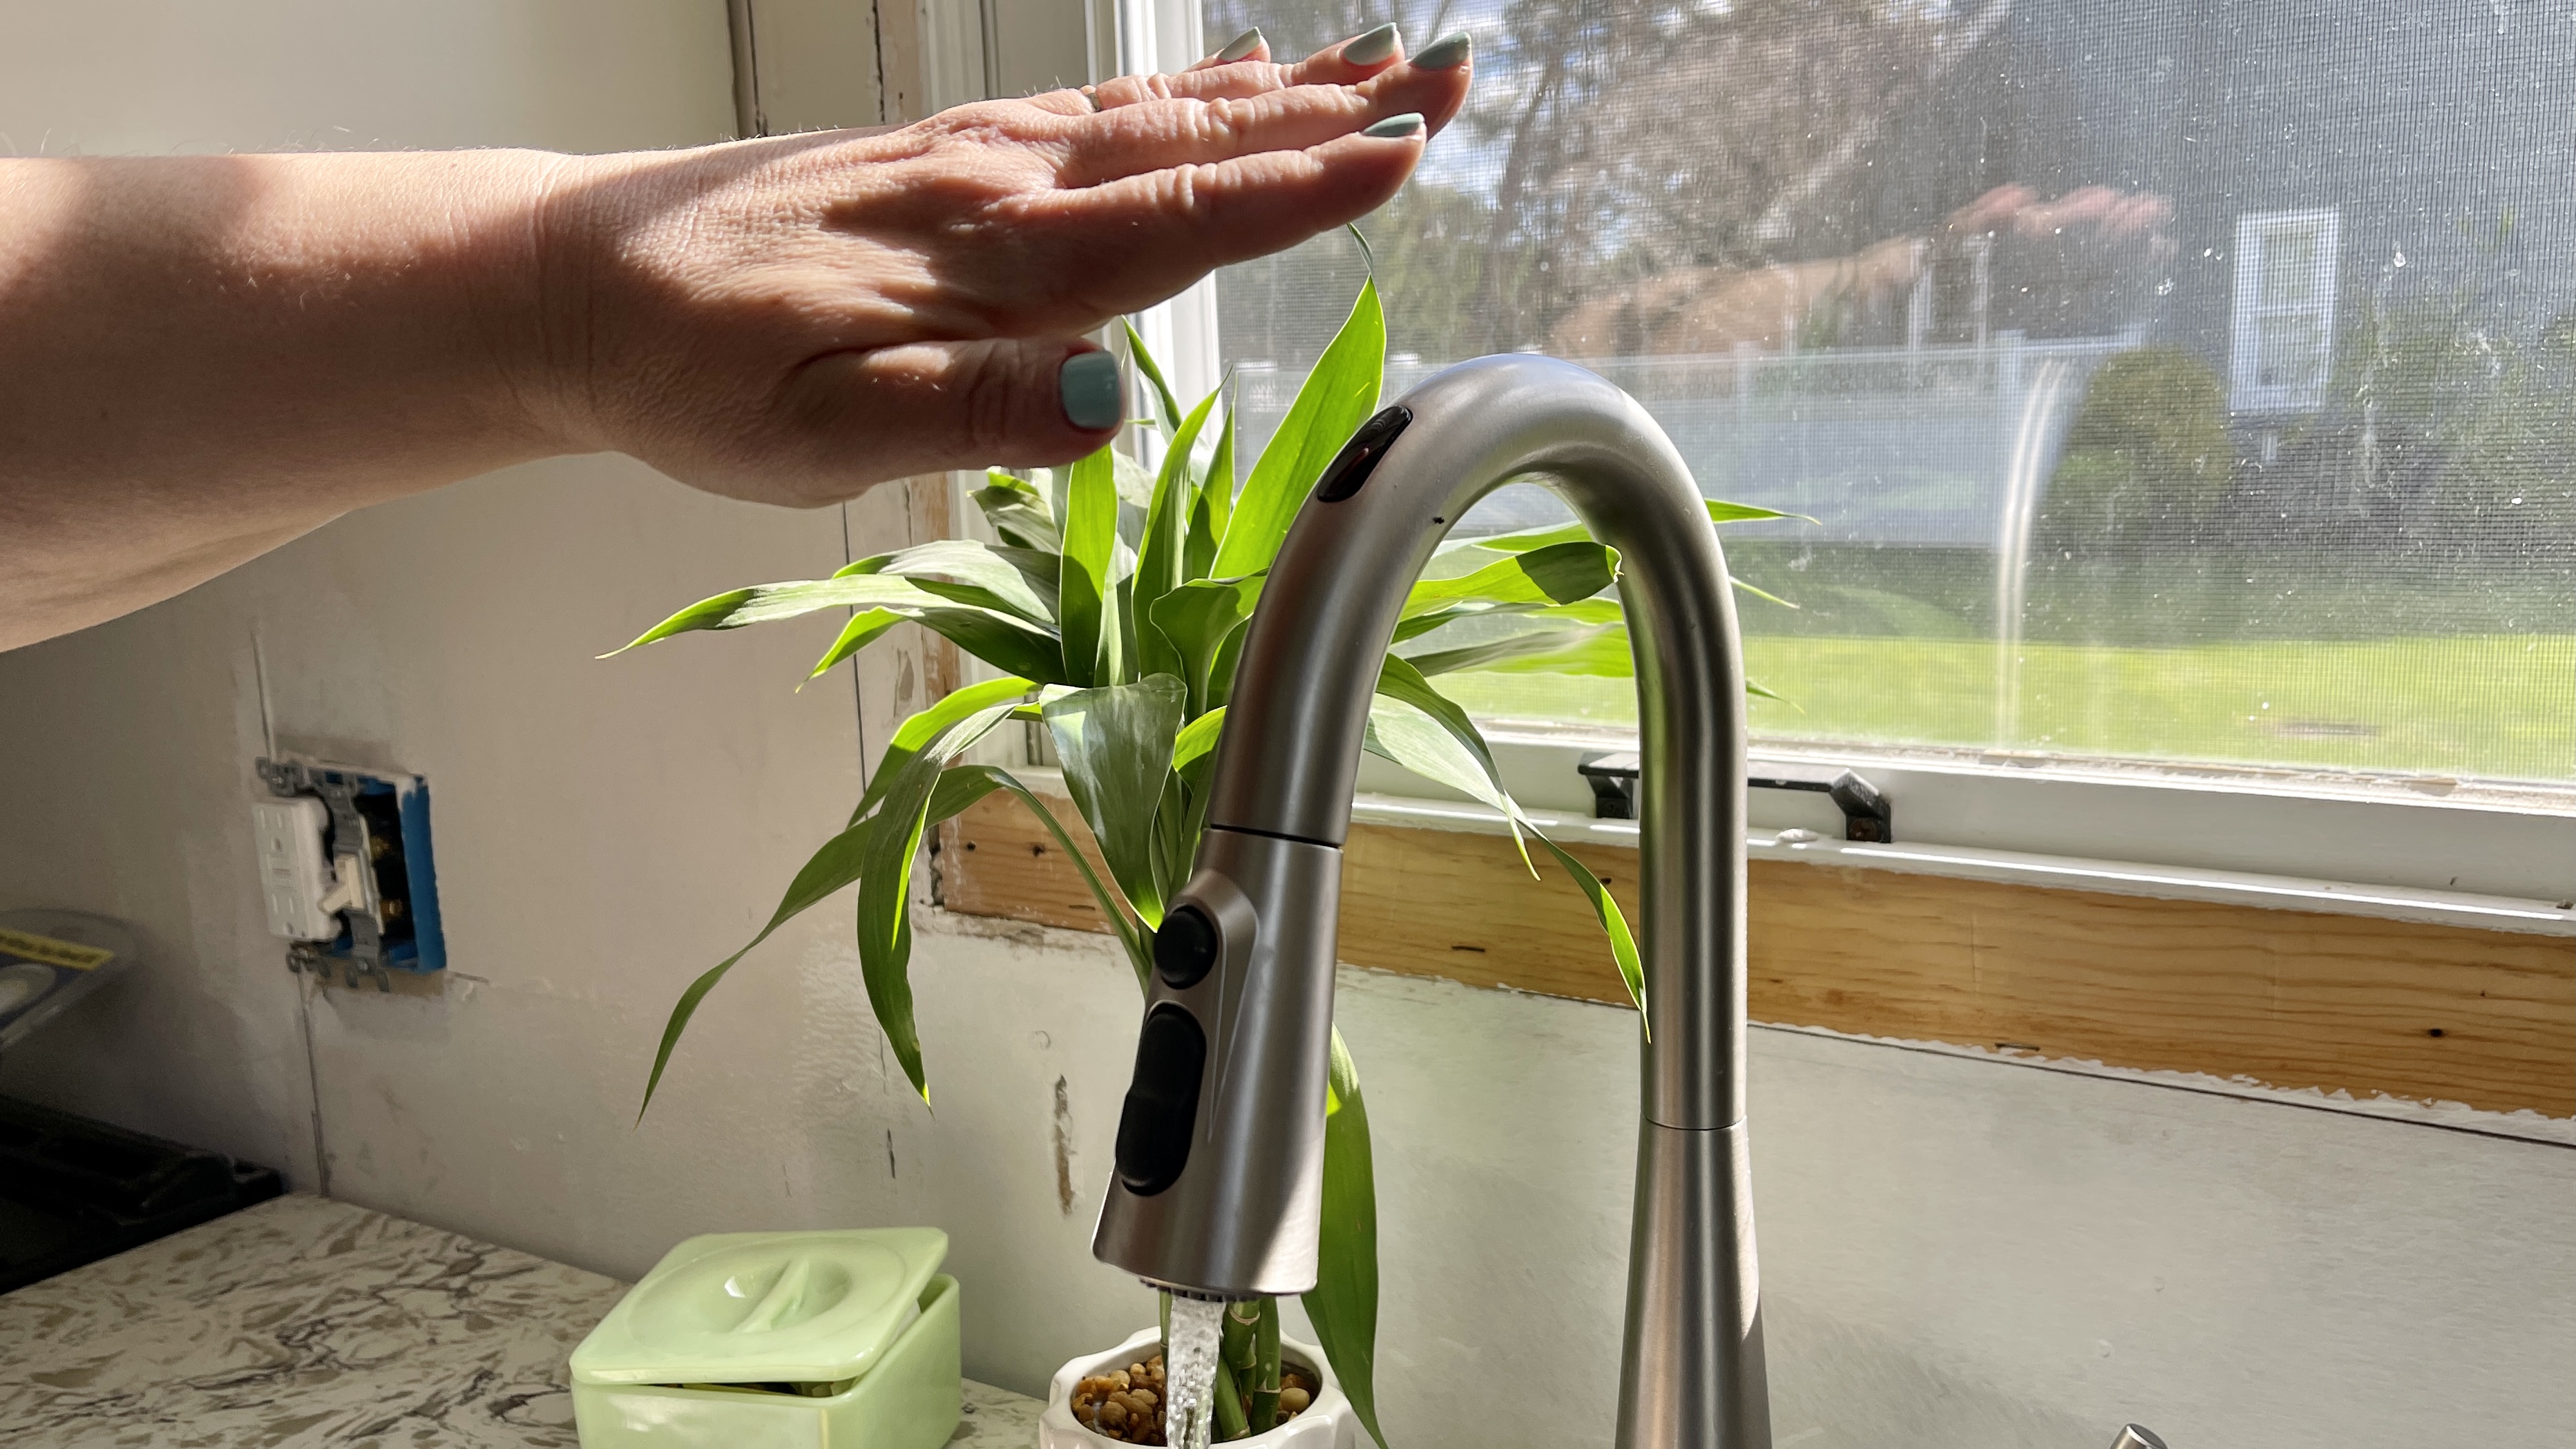 This Alexa smart faucet is the coolest smart home device I've ever used